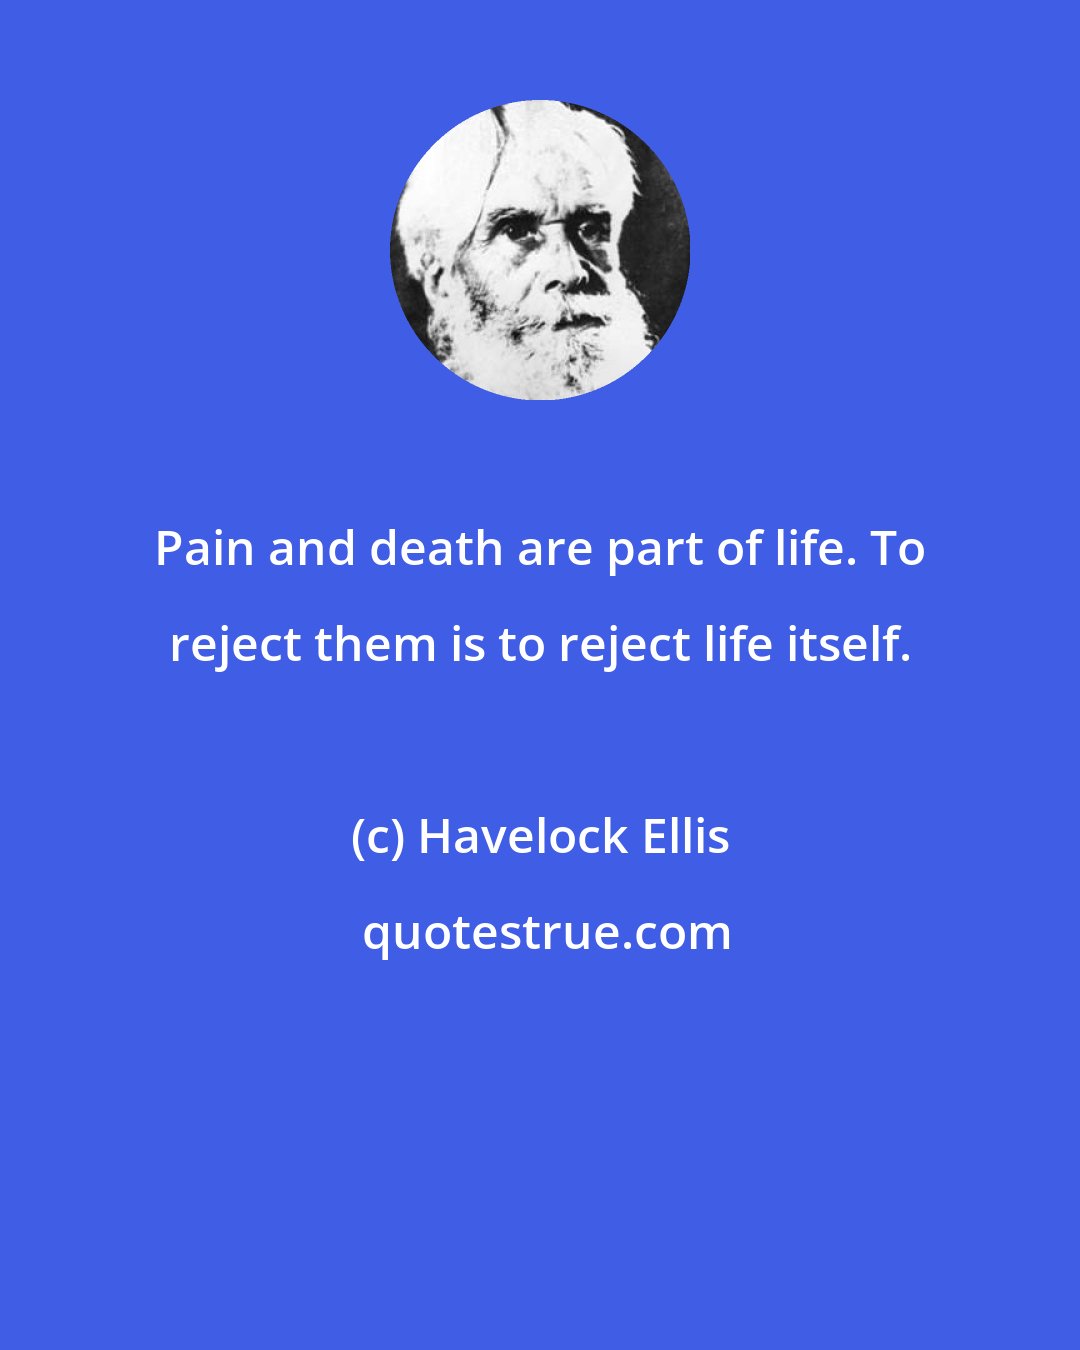 Havelock Ellis: Pain and death are part of life. To reject them is to reject life itself.